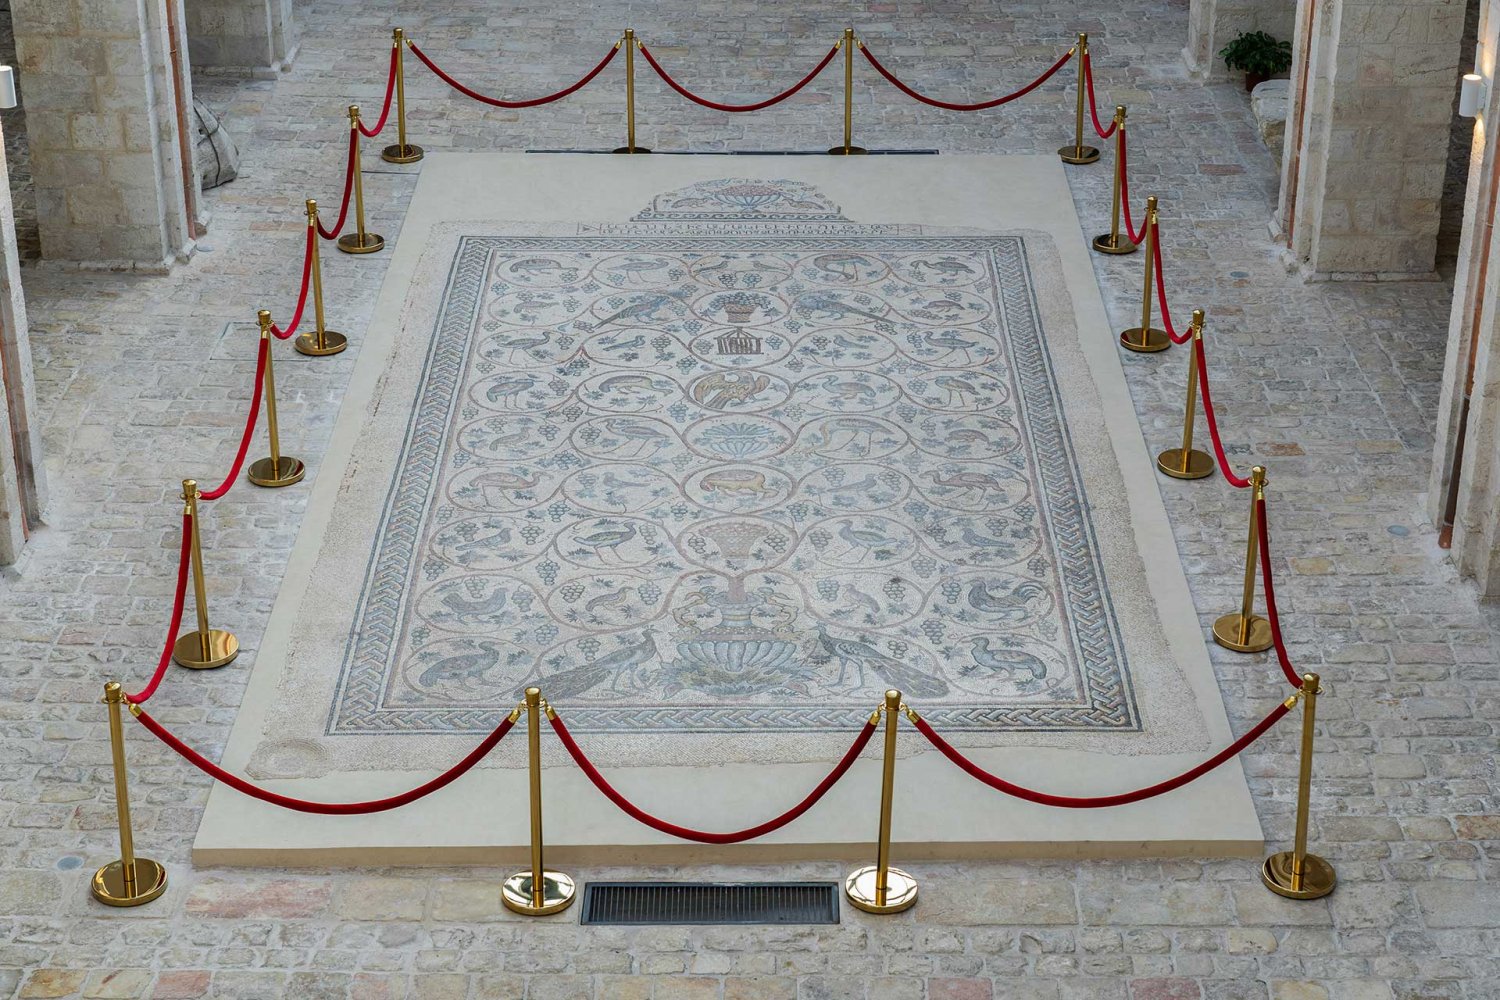 The mosaic floor of the "unknown soldier” in the new Armenian museum in Jerusalem